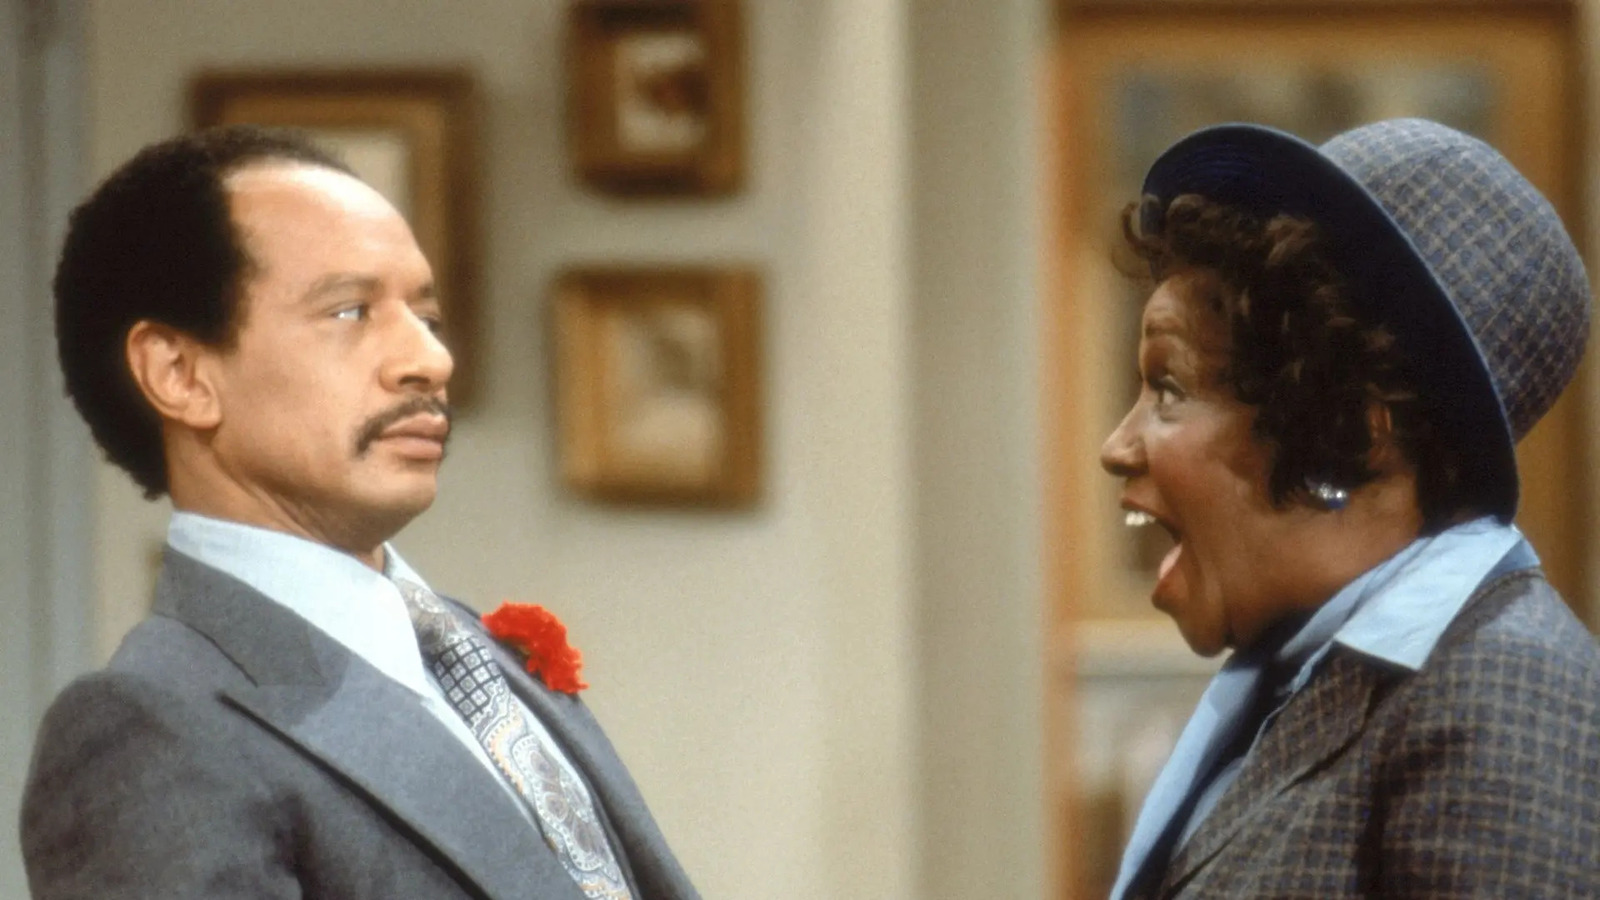 The Only Major Actors Still Alive From The Jeffersons